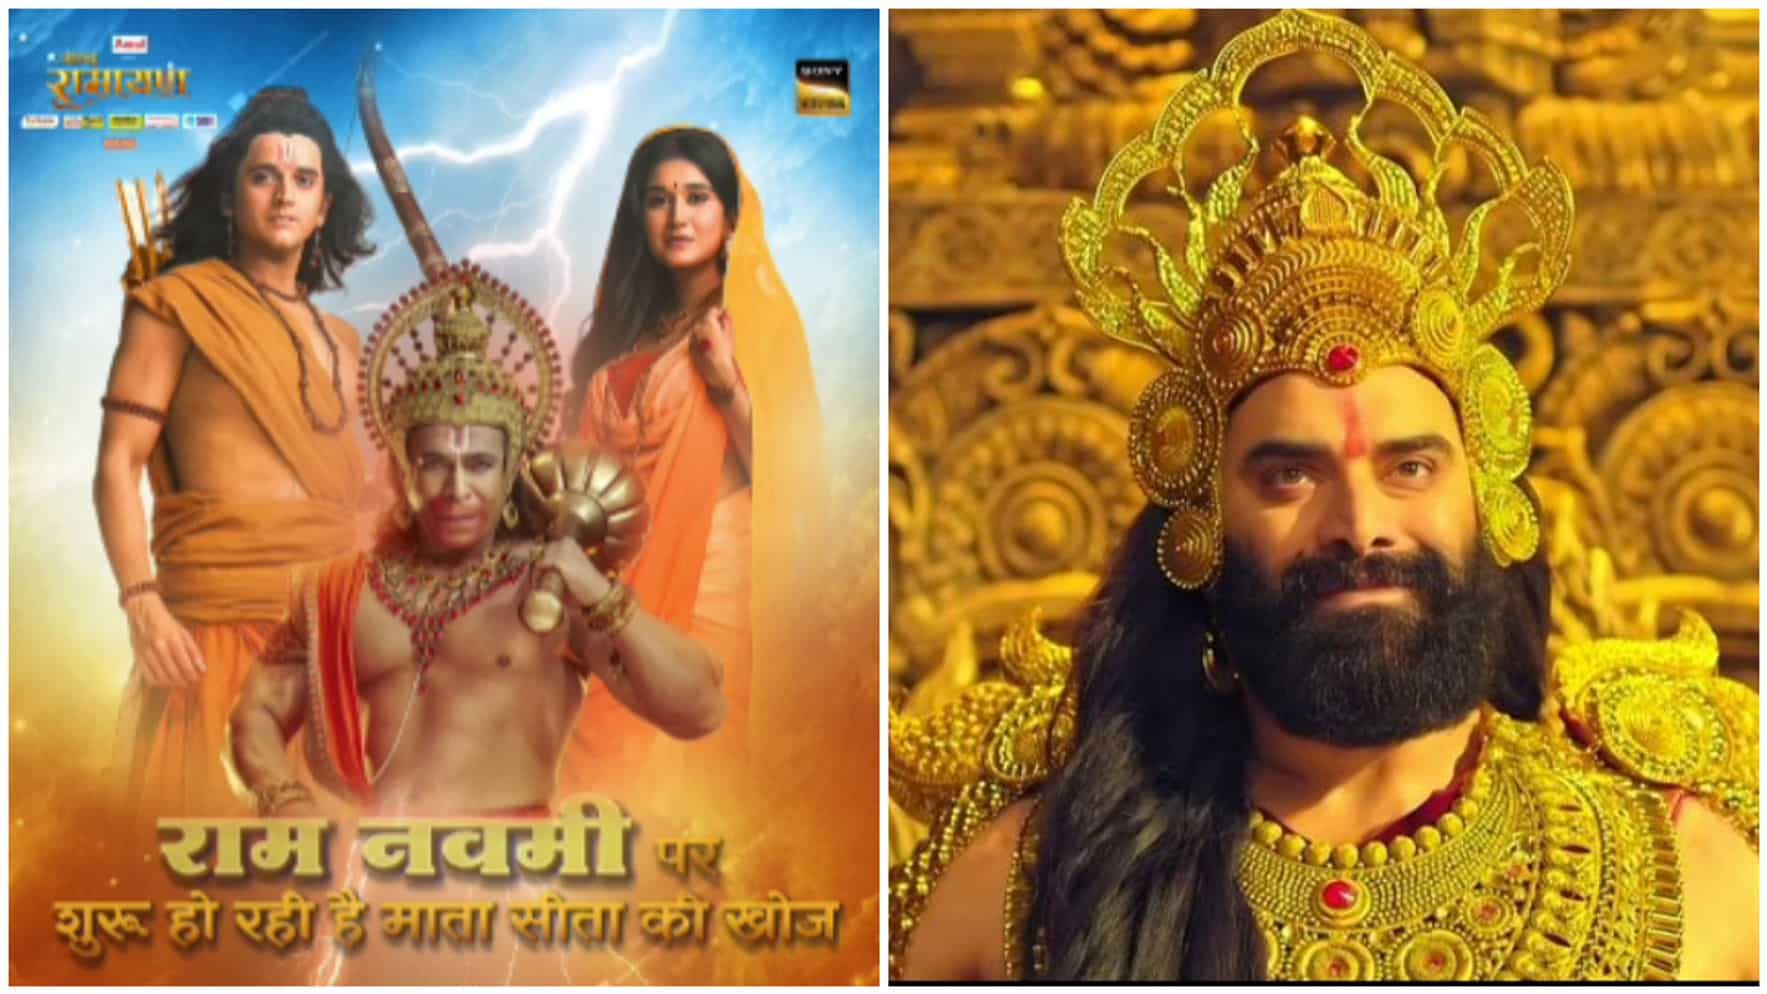 https://www.mobilemasala.com/film-gossip/Shrimad-Ramayan---Sony-Live-To-Air-1-Hour-Special-Episodes-On-Ram-Navami-Details-inside-i255061